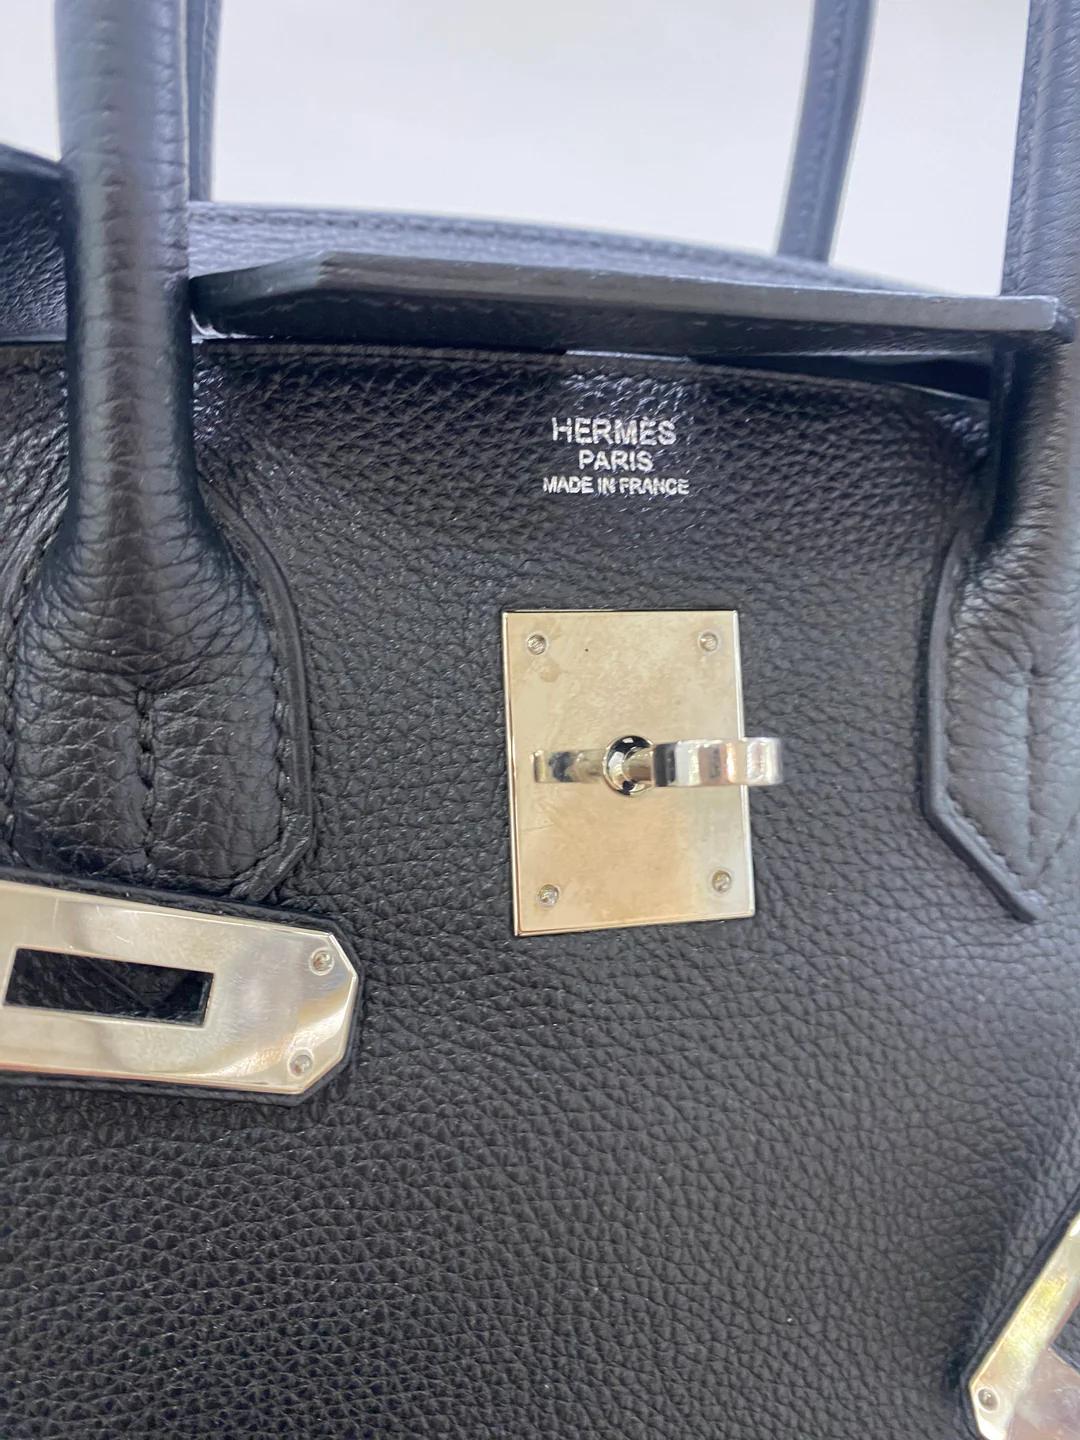 Condition: Very Good Used Condition - slight signs of wear.

Colour: Noir

Leather: Togo leather

Hardware Colour: Palladium 

Measurement:

Length: 30cm

Height: 22cm

Depth: 16cm

Inclusion: Nothing

Year: 2016 X stamp

Origin: